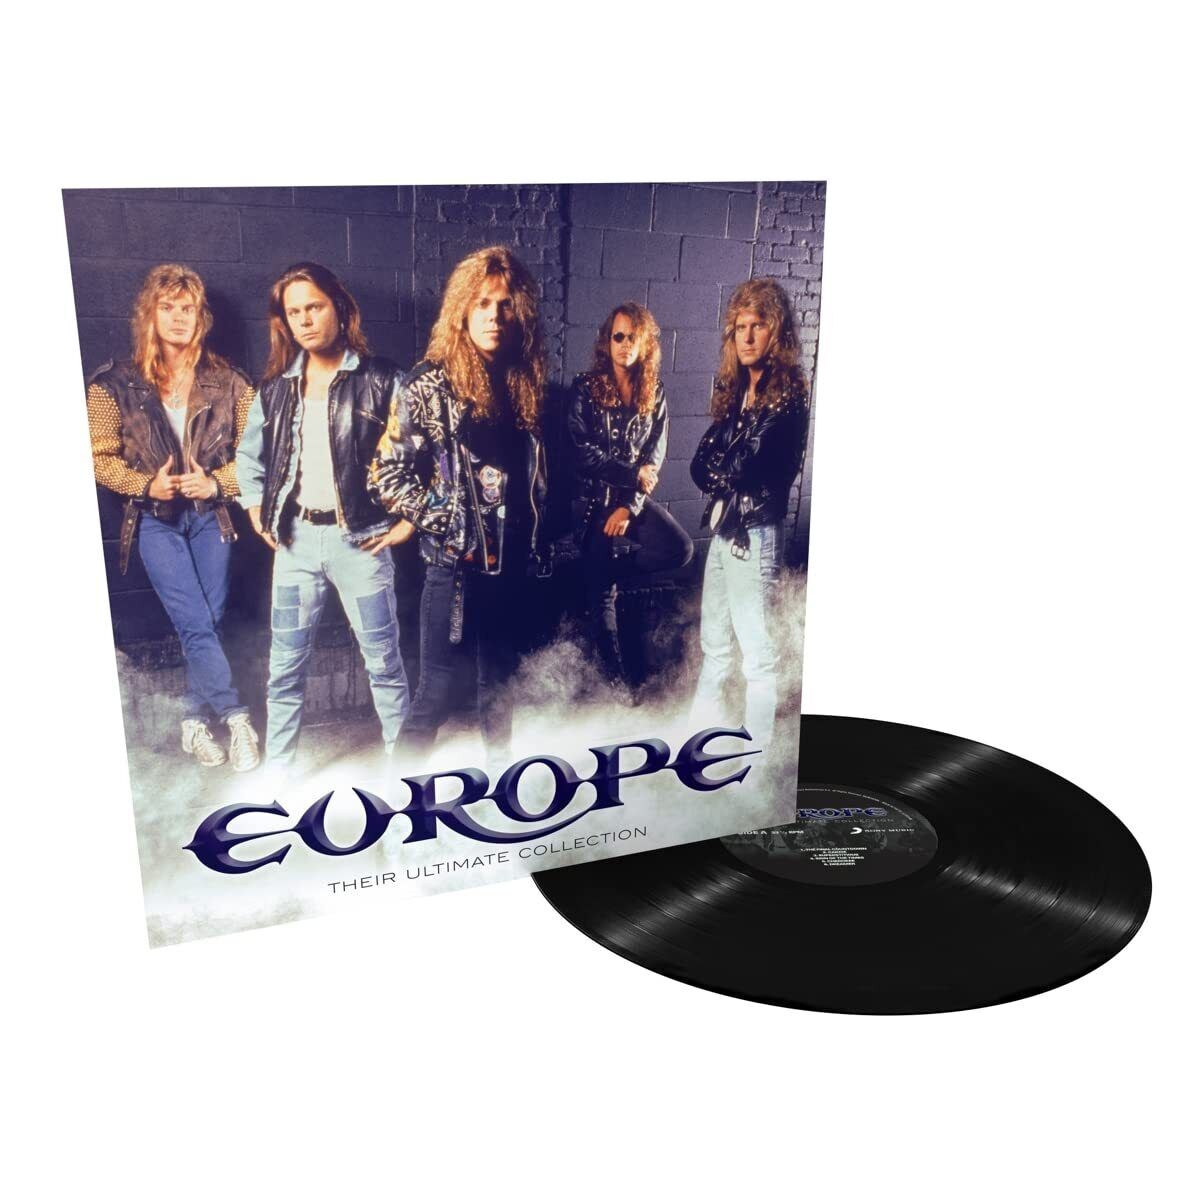 Europe Their Ultimate Collection  (Vinyl)  (UK IMPORT) 